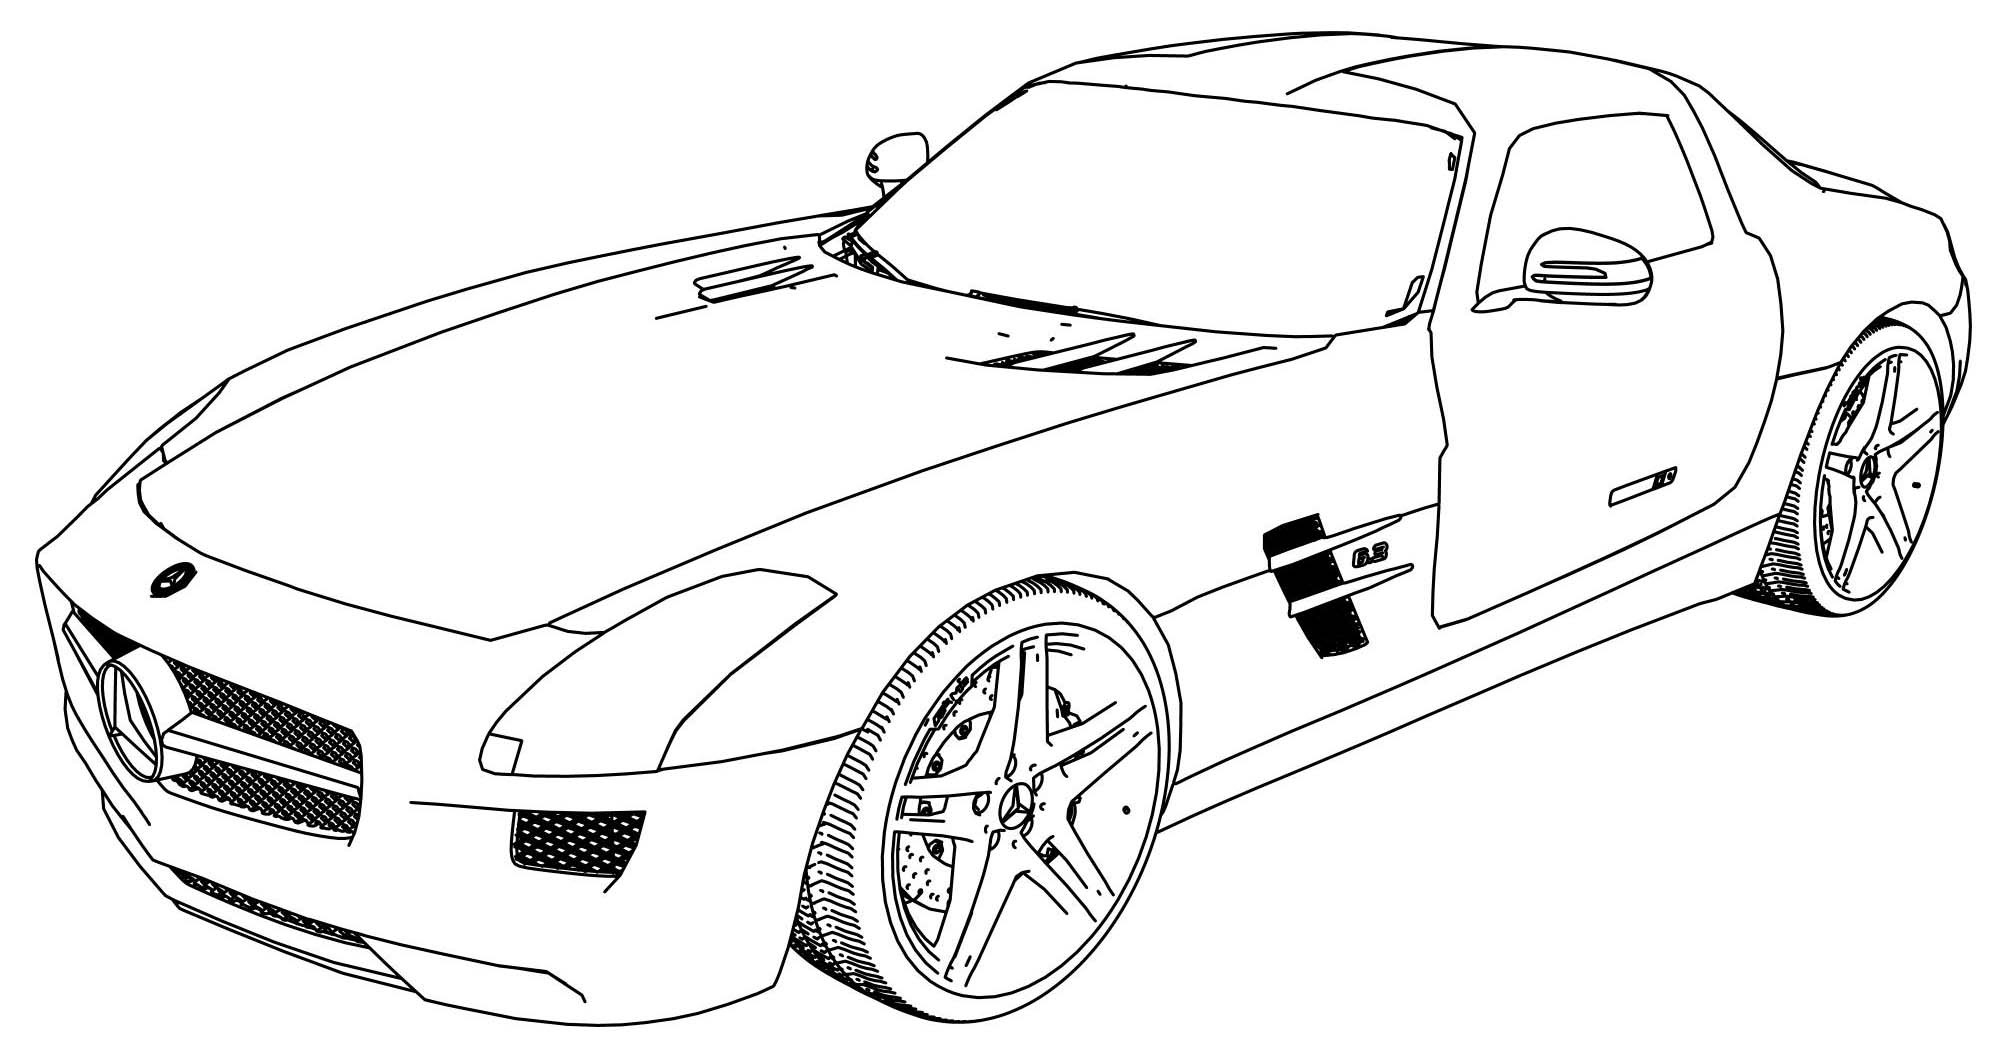 Download Mercedes Coloring Pages to download and print for free